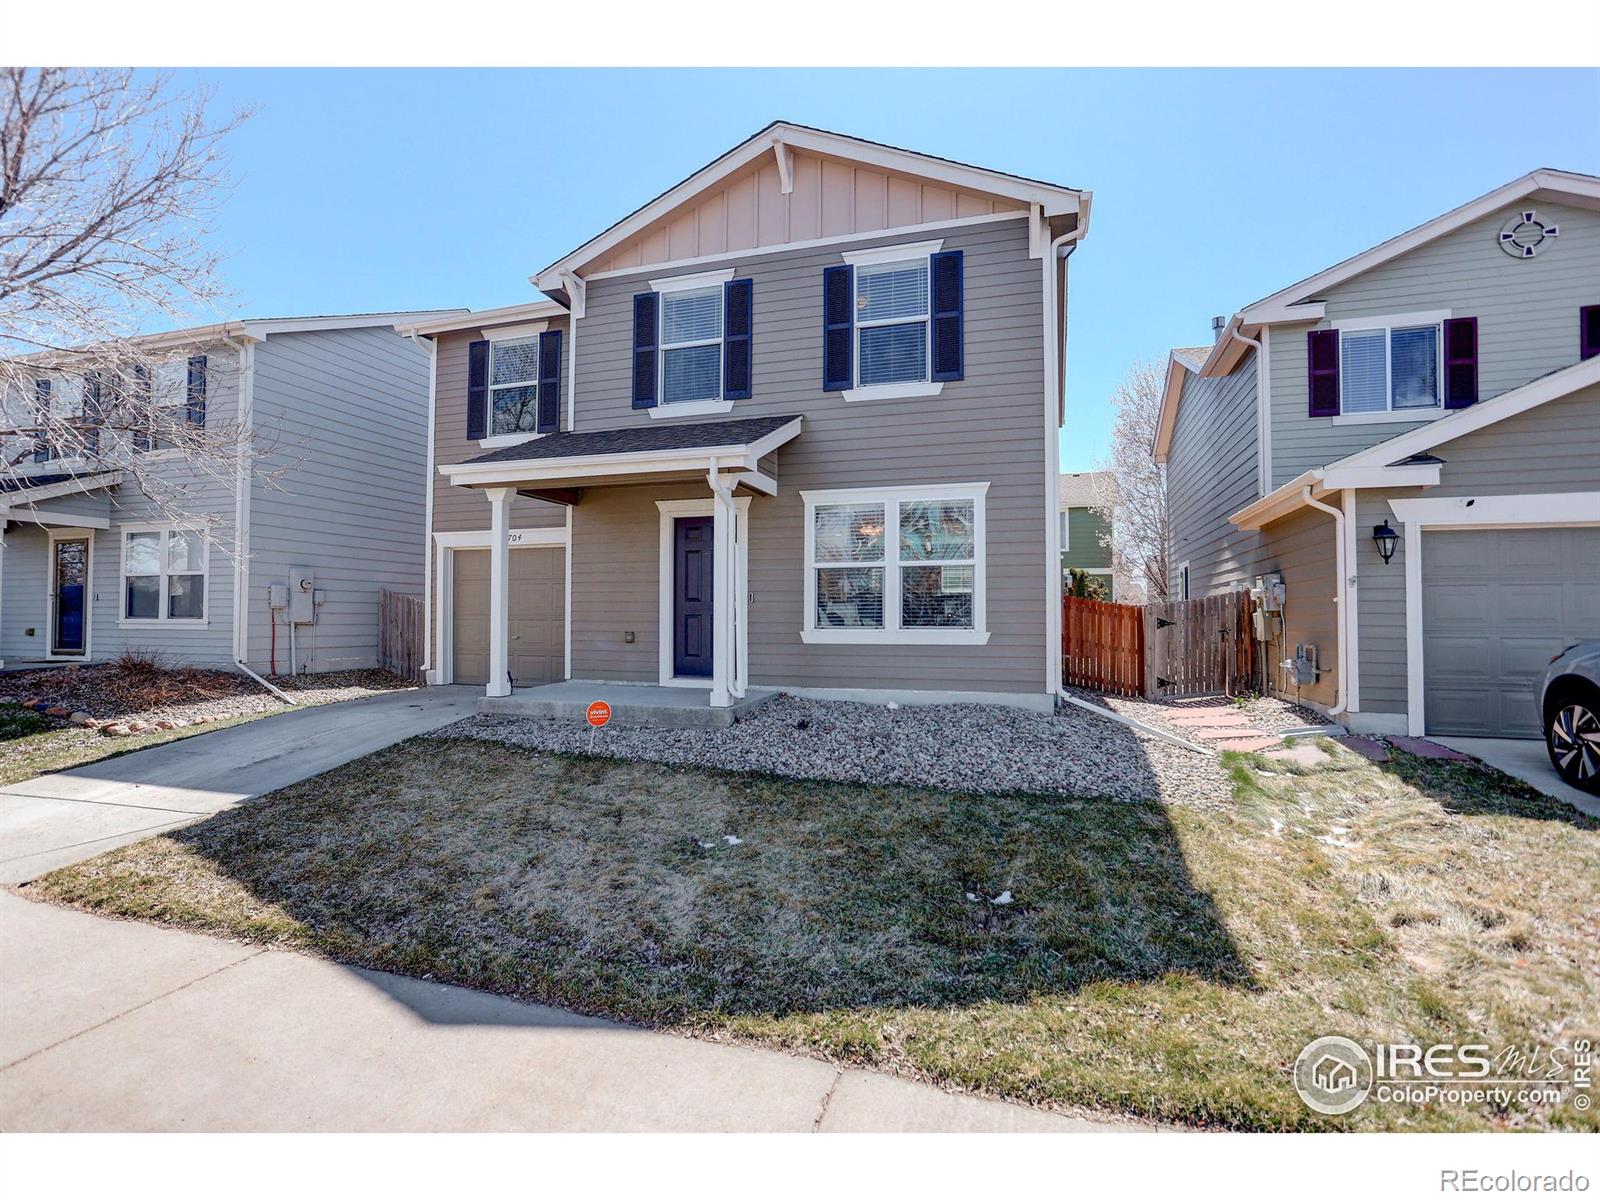 10704  butte drive, longmont sold home. Closed on 2024-04-24 for $440,000.